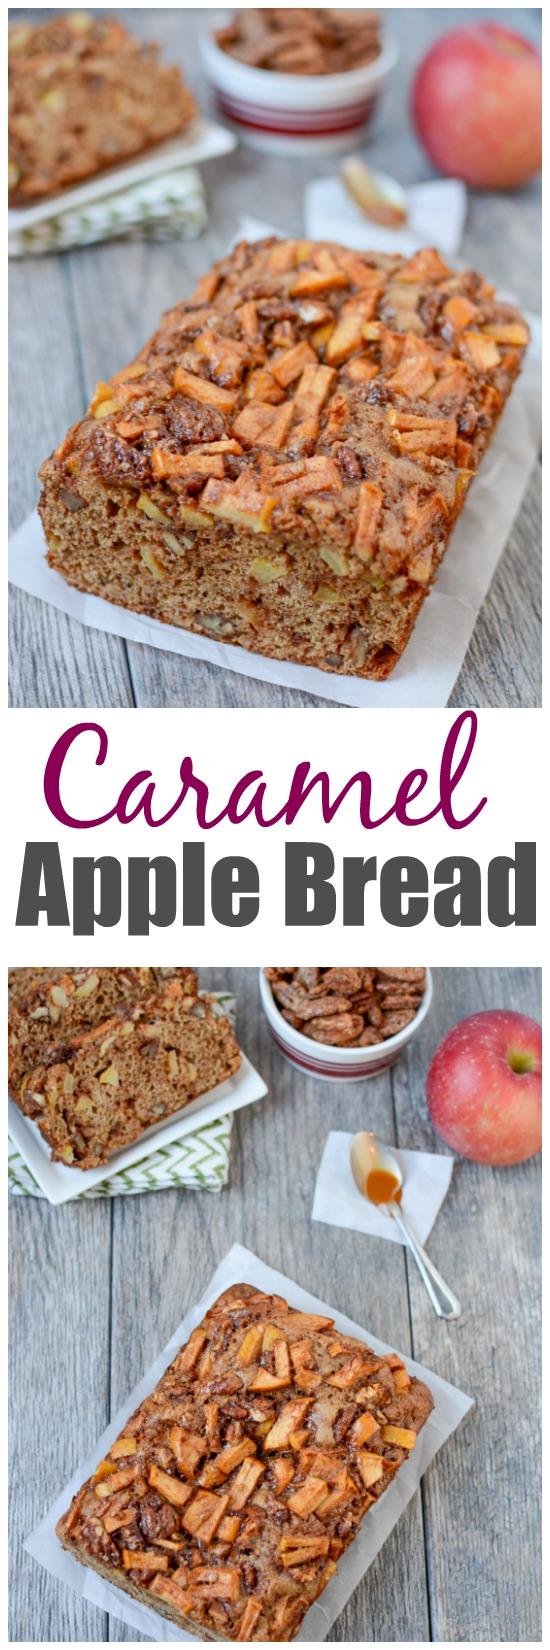 Studded with sweet cinnamon apples and pecans, this Caramel Apple Bread makes the perfect snack. Plus 5 more delicious ways to eat apples!